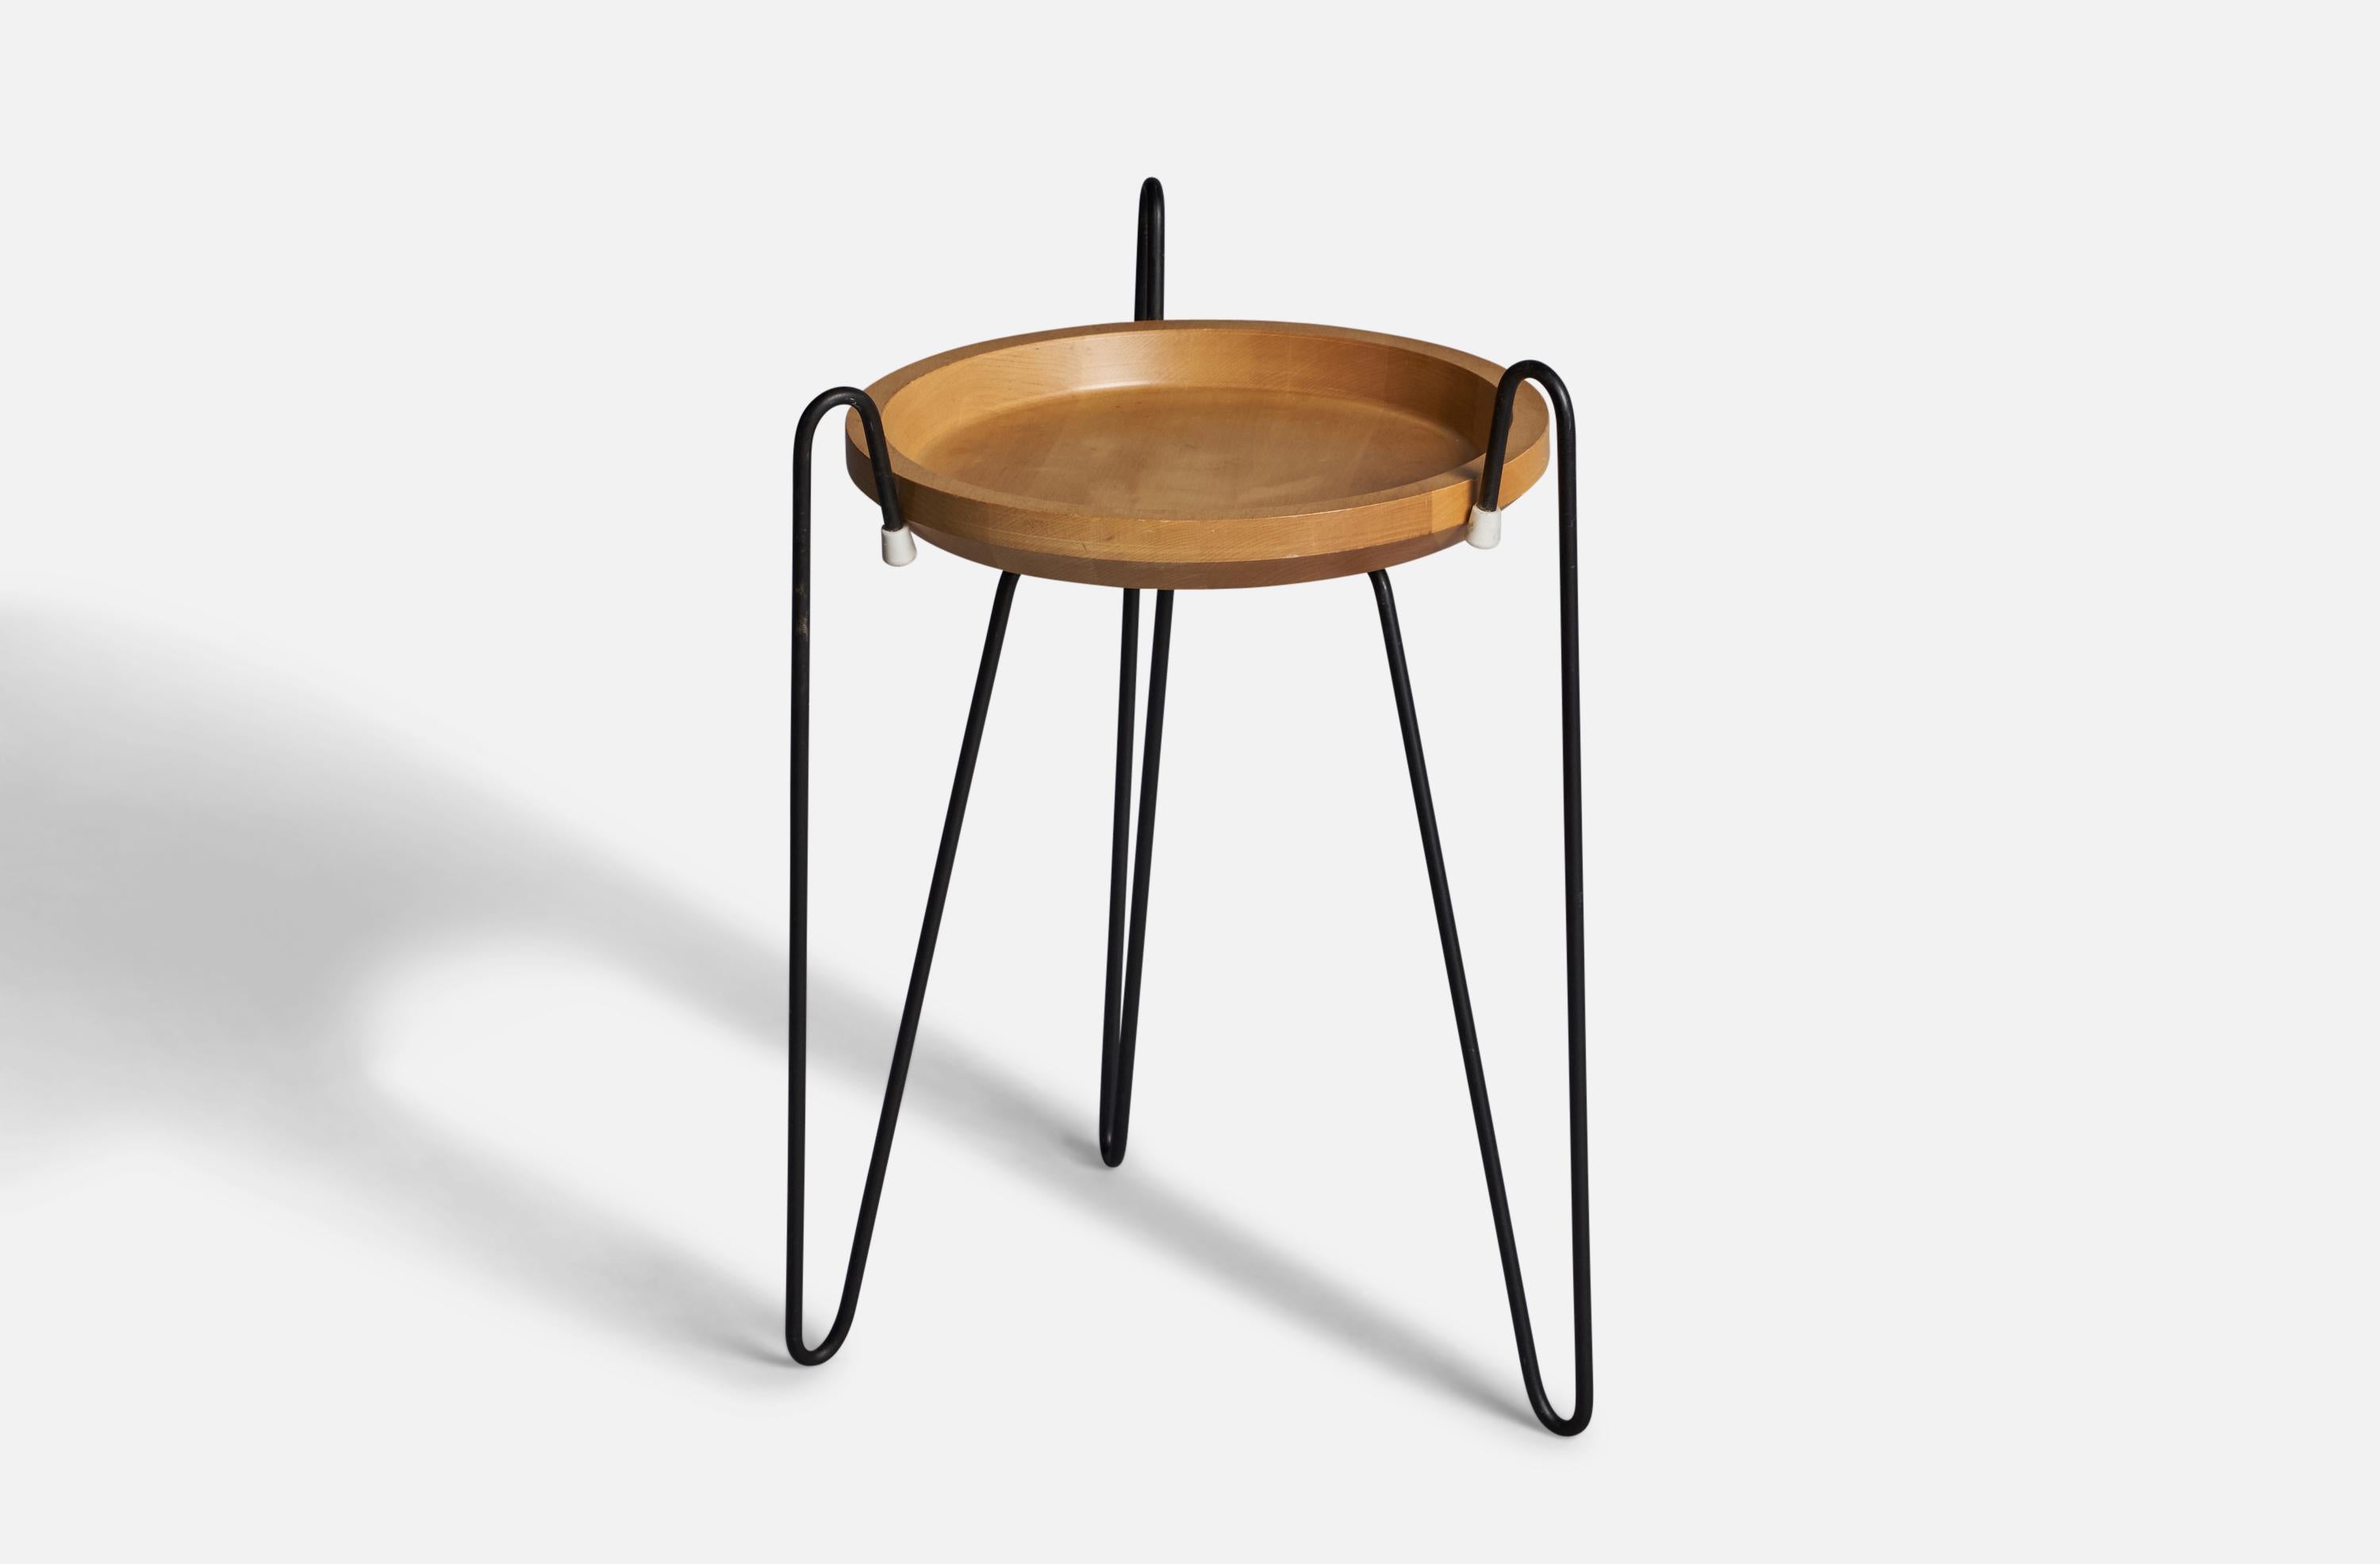 A demountable oak and black-lacquered metal side table, designed and produced in Sweden, c. 1970s.